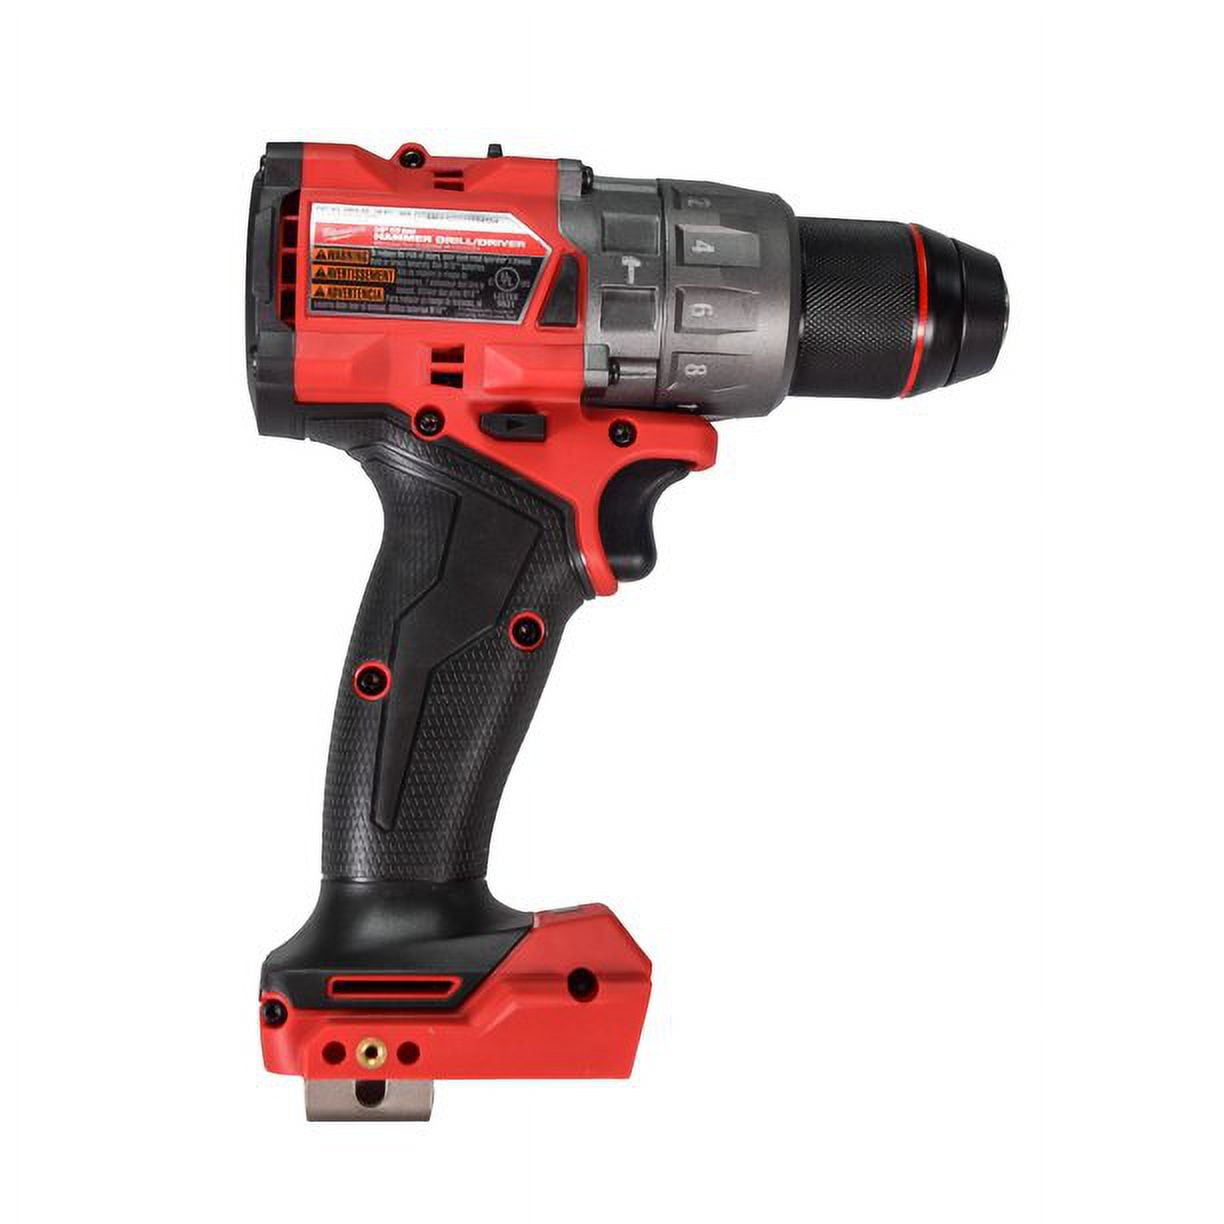 Restored Milwaukee 2904-20 12V Hammer Drill/ Driver (Bare Tool) 1/2 inches (Refurbished)